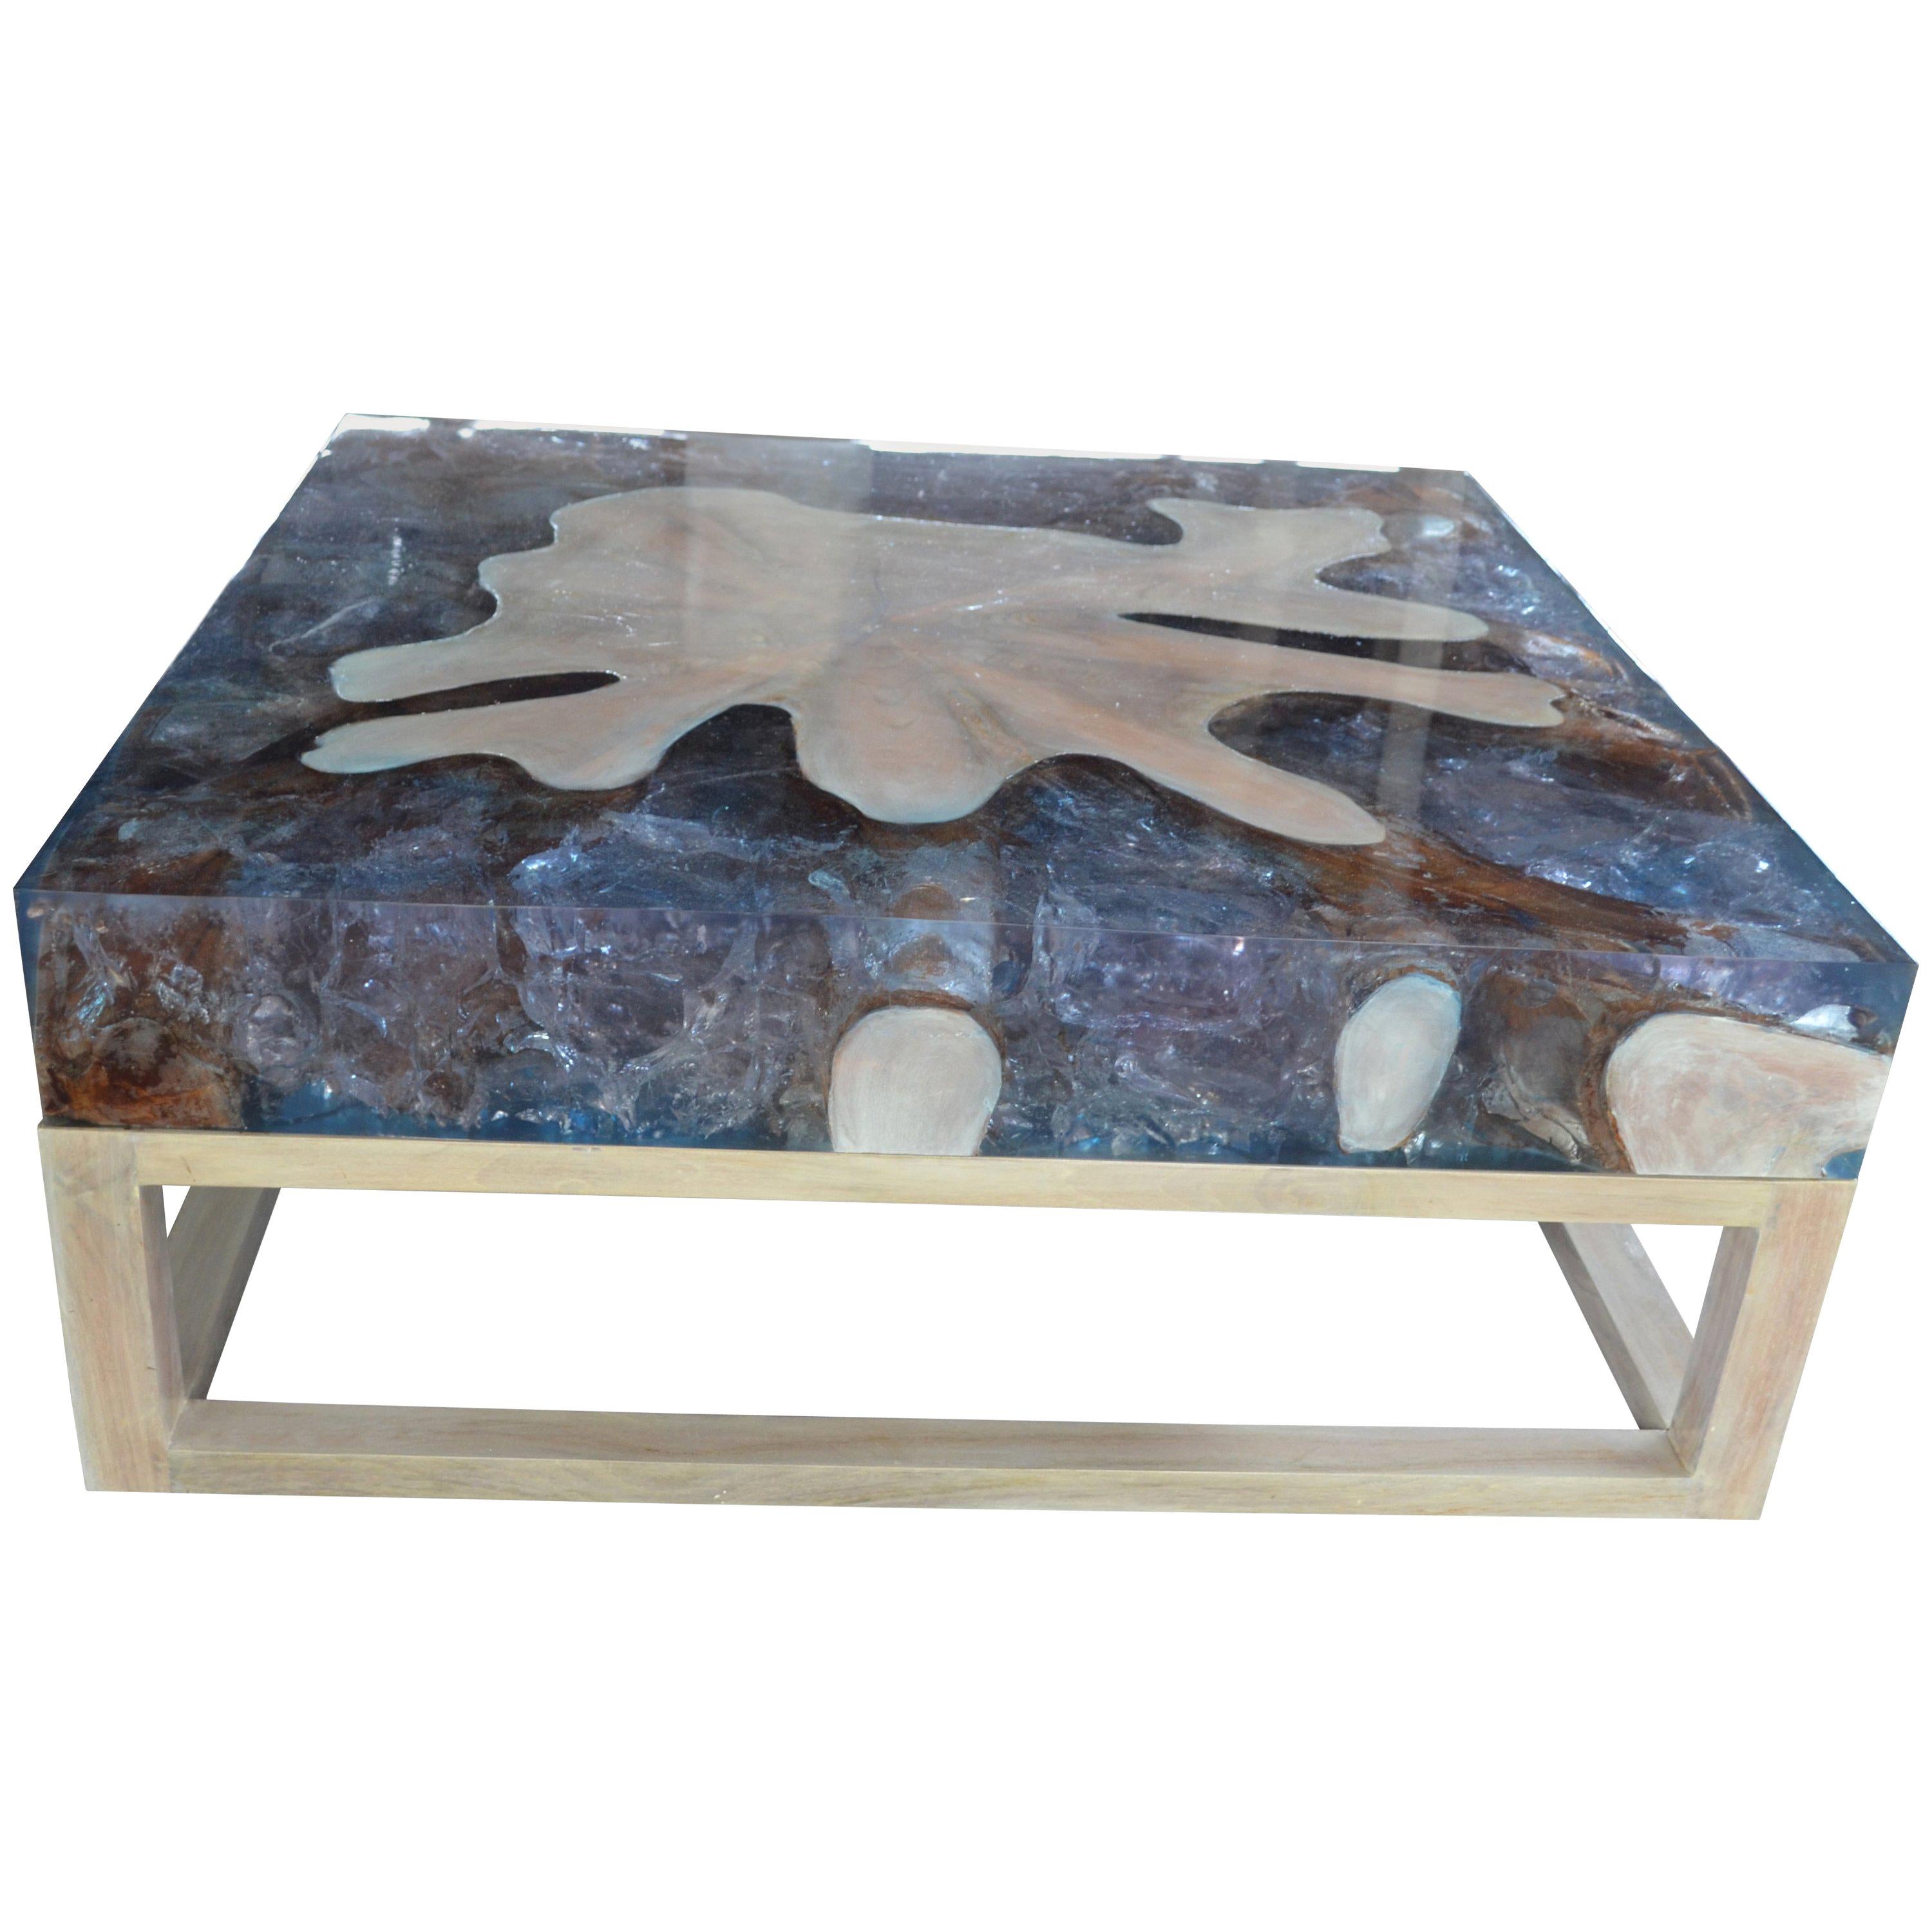 Andrianna Shamaris St. Barts Teak Wood and Cracked Resin Coffee Table For Sale